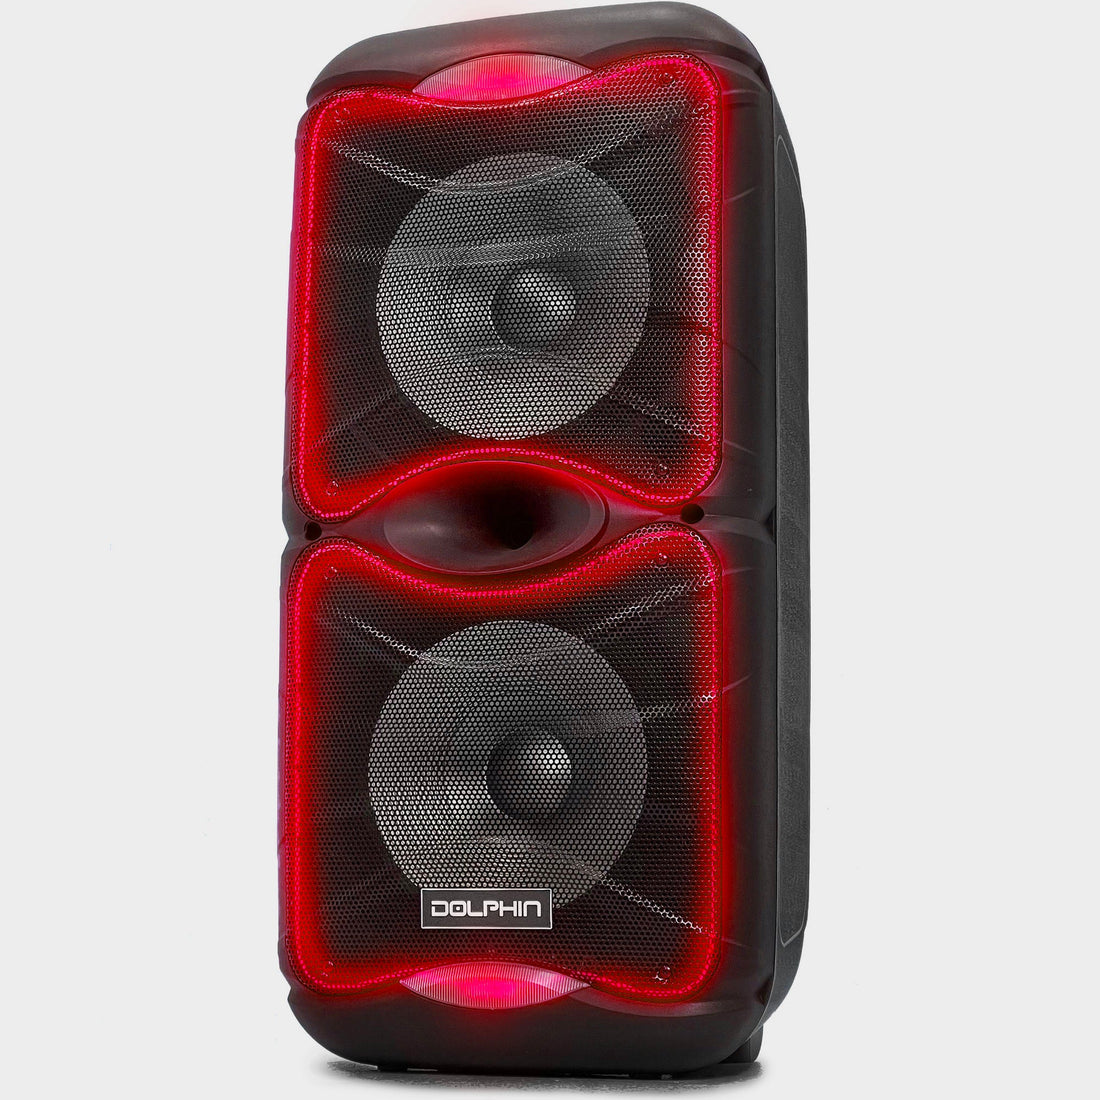 Dolphin SP-212RBT Portable Bluetooth Party Speaker with Lights and PA System with Expandable Battery - Top ElectrosSpeakersSP-212RBT682055446981